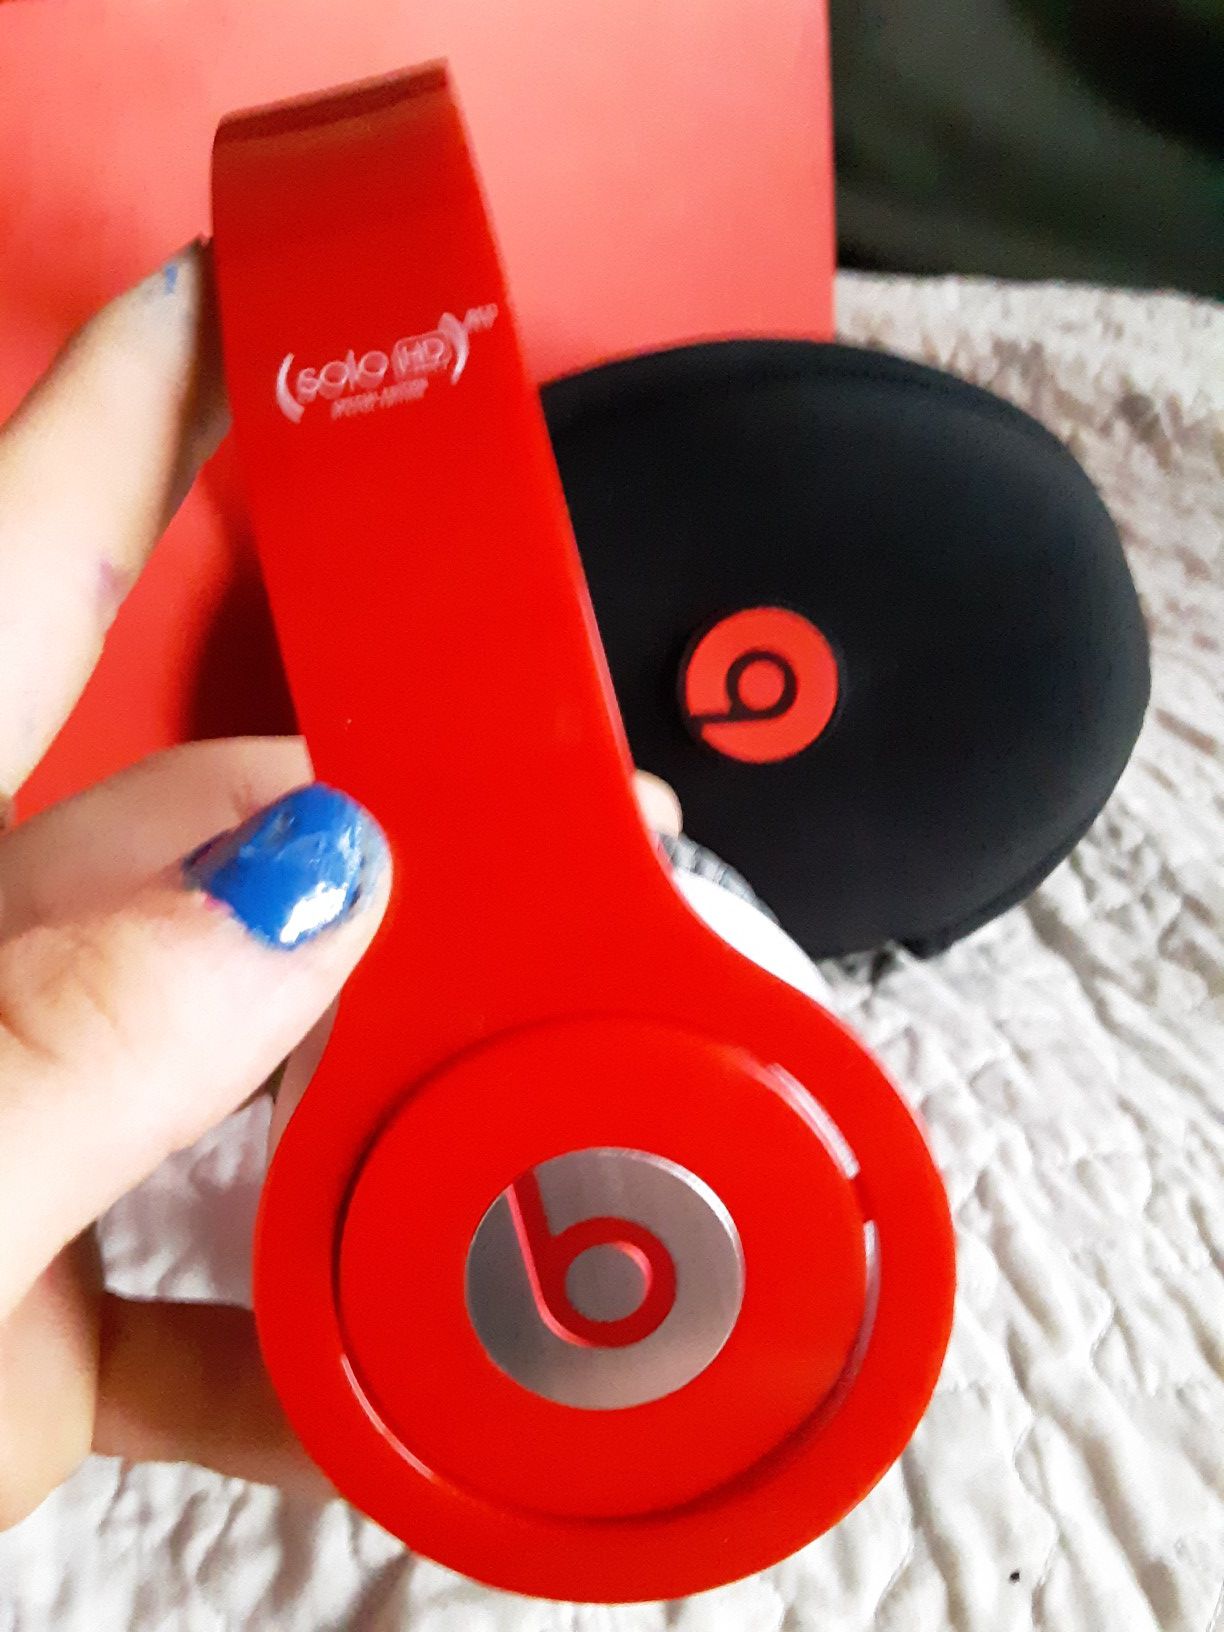 Special edition red beats solo HD headphones